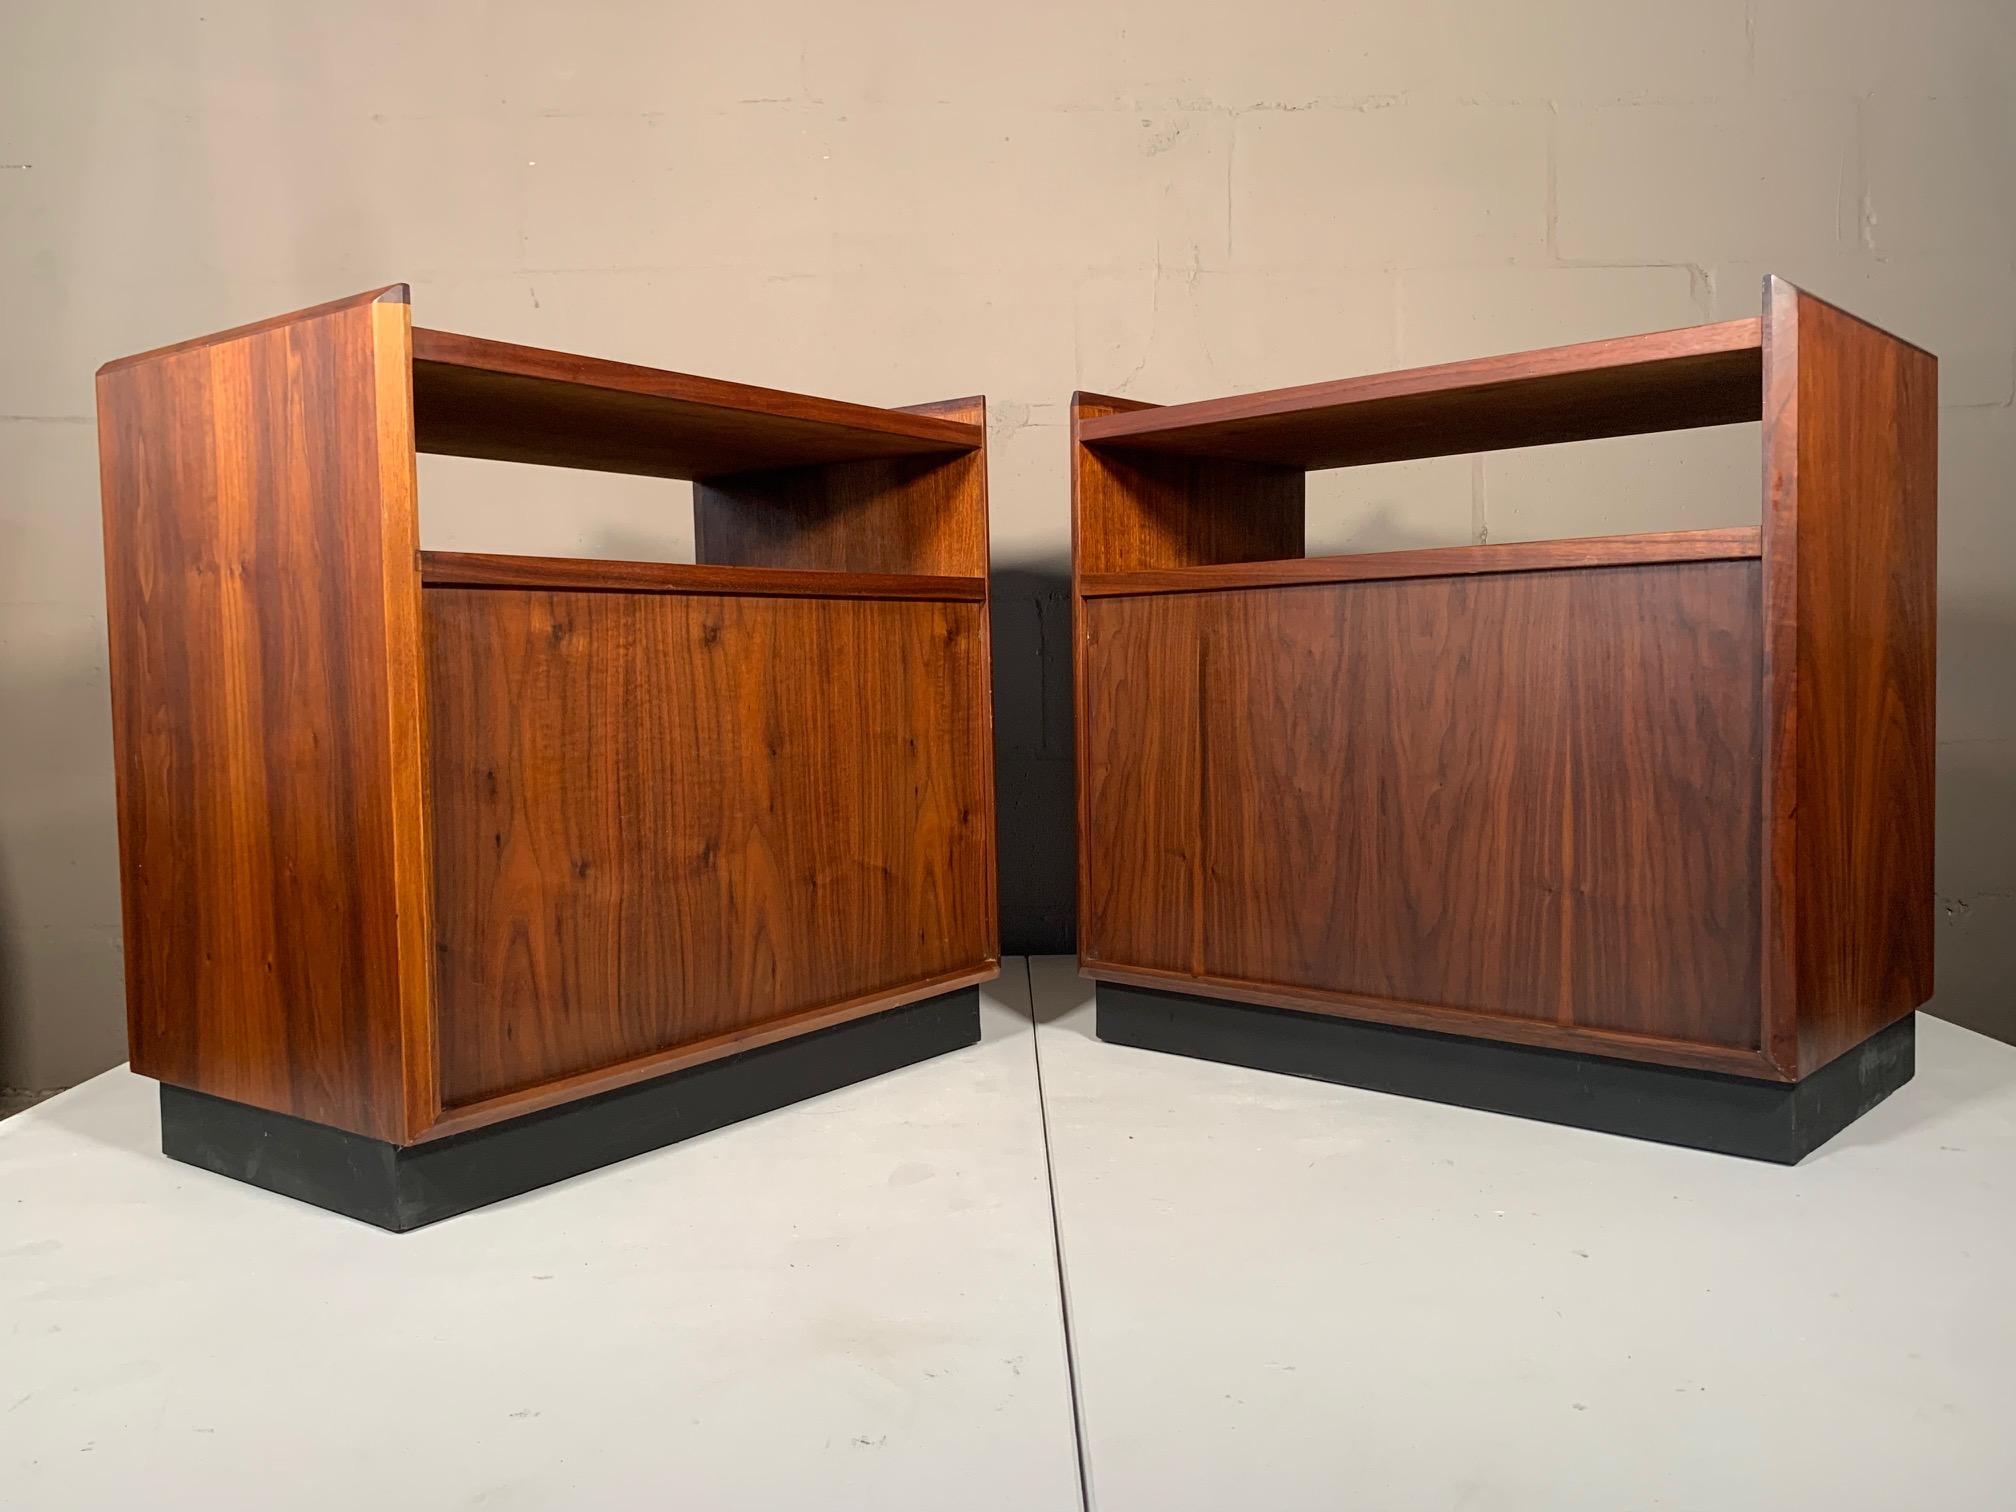 Mid-20th Century Pair of Unusual End Tables by Jack Cartwright for Founders in Walnut